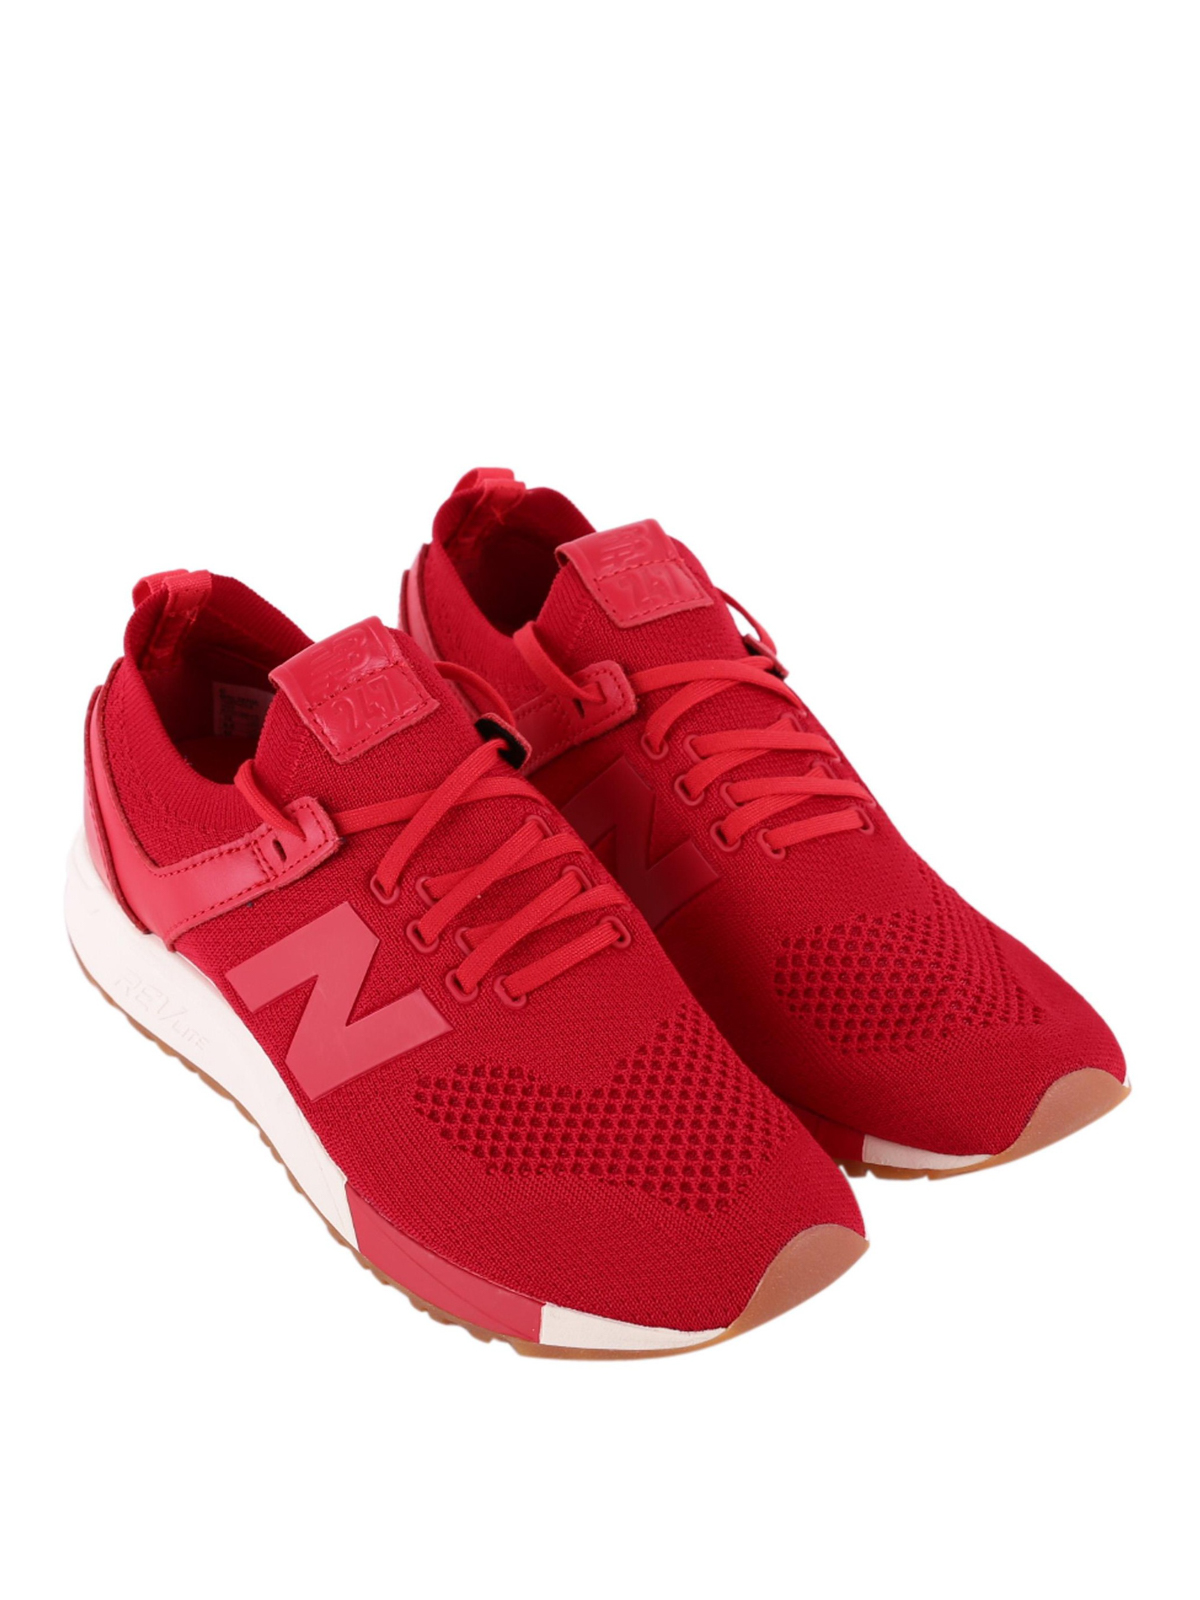 Trainers New Balance - 247 Decon Red Sneakers - Mrl247Dc